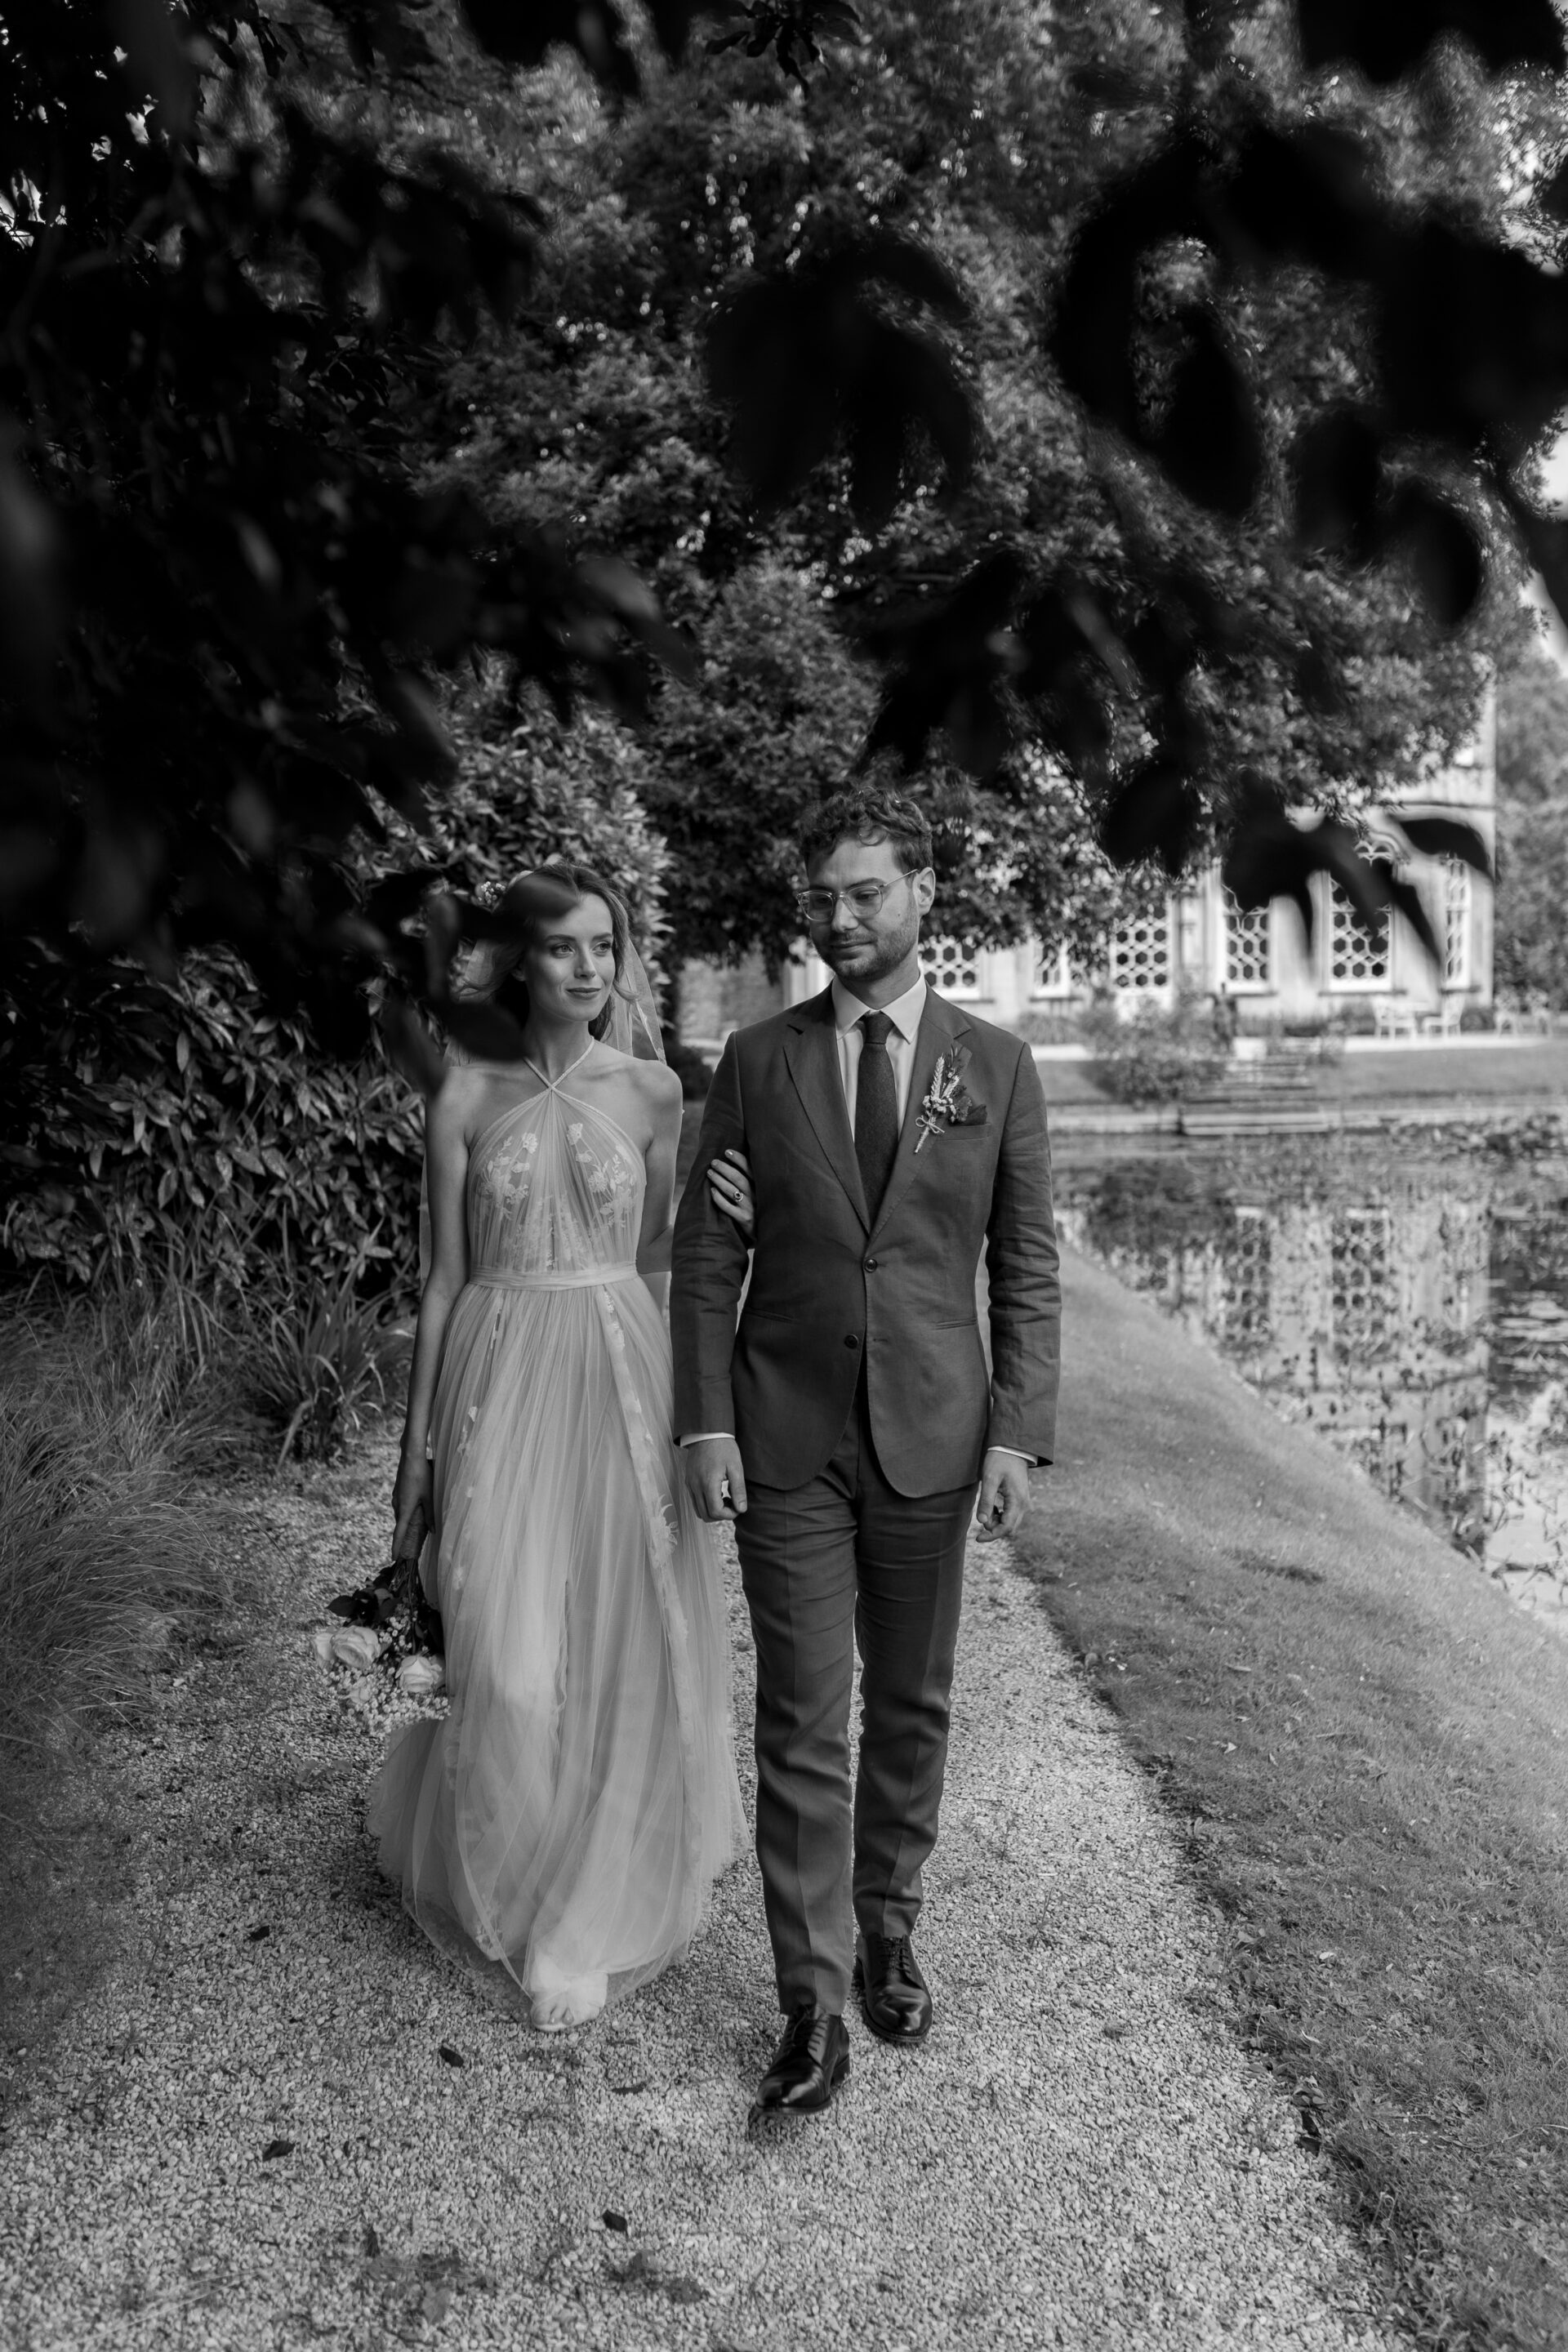 The bride and groom explore the grounds at Frampton Court Estate, Gloucestershire wedding venue